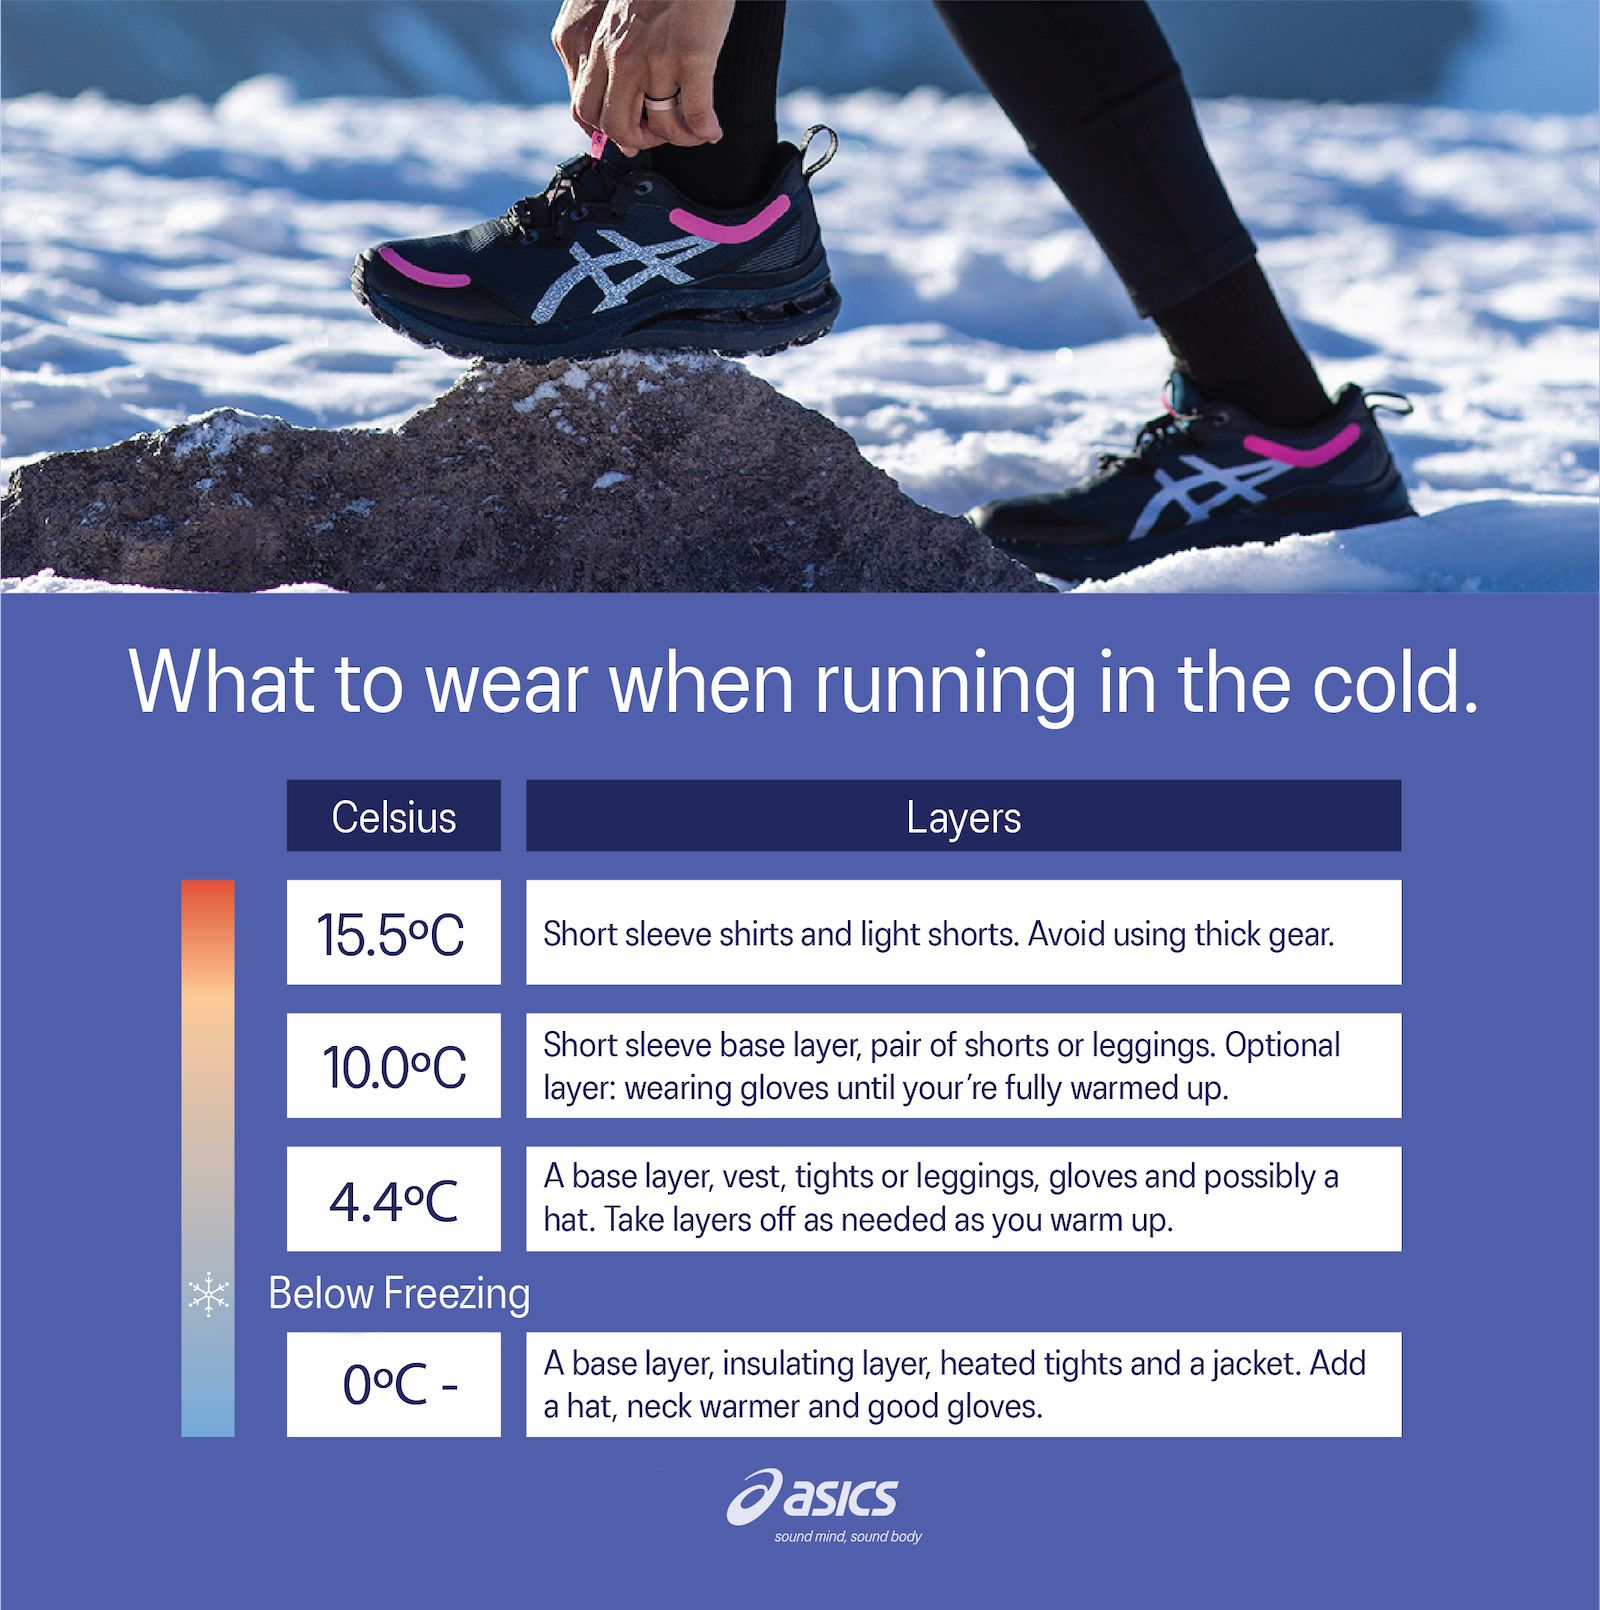 Top Tips to Being Properly Prepared for Cold Weather Runs